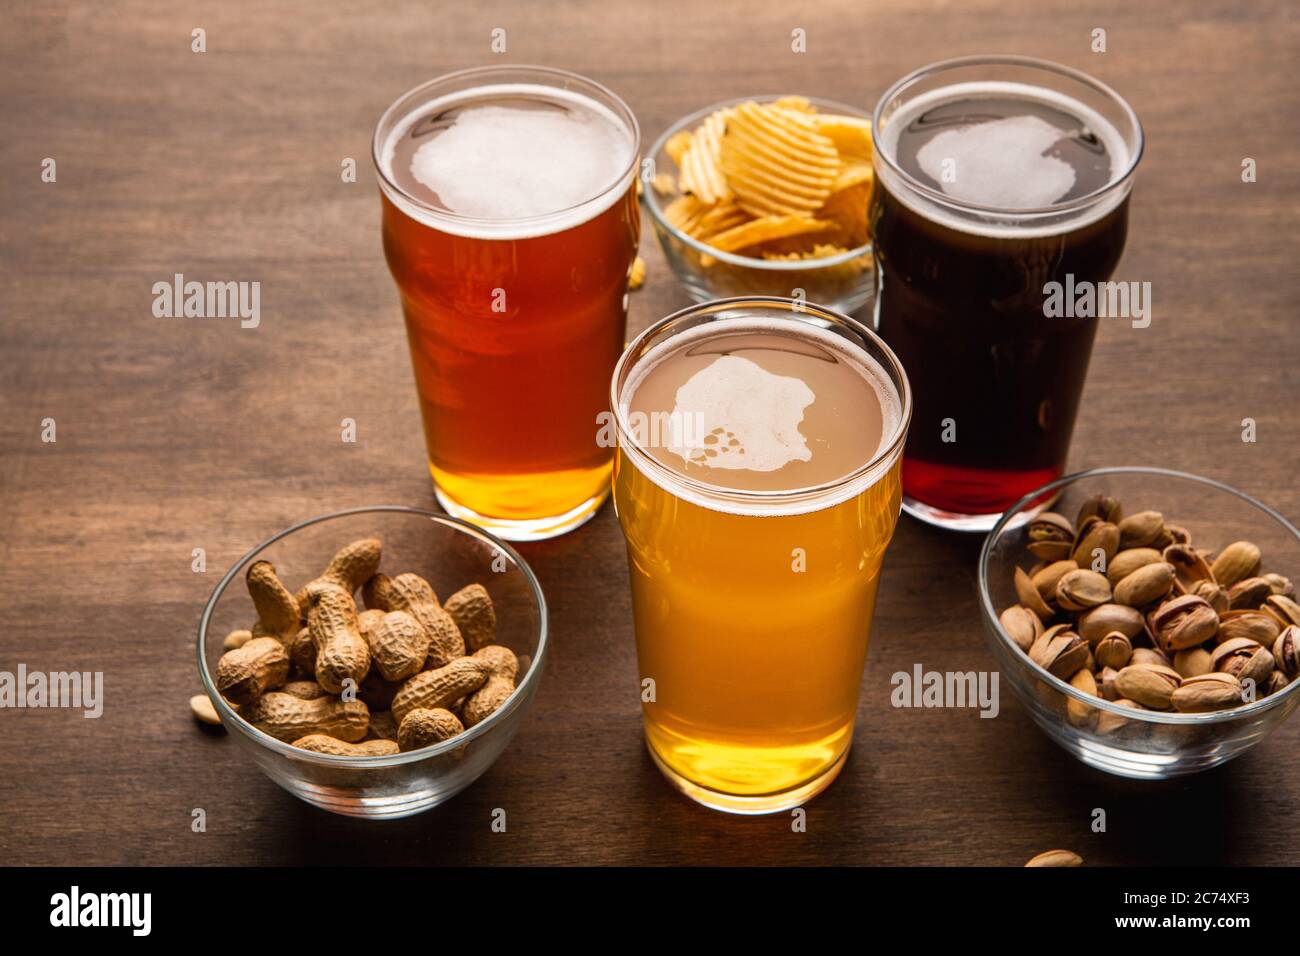 Dark amber and unfiltered beer in glasses. Pistachios, nuts and chips in plates on table Stock Photo